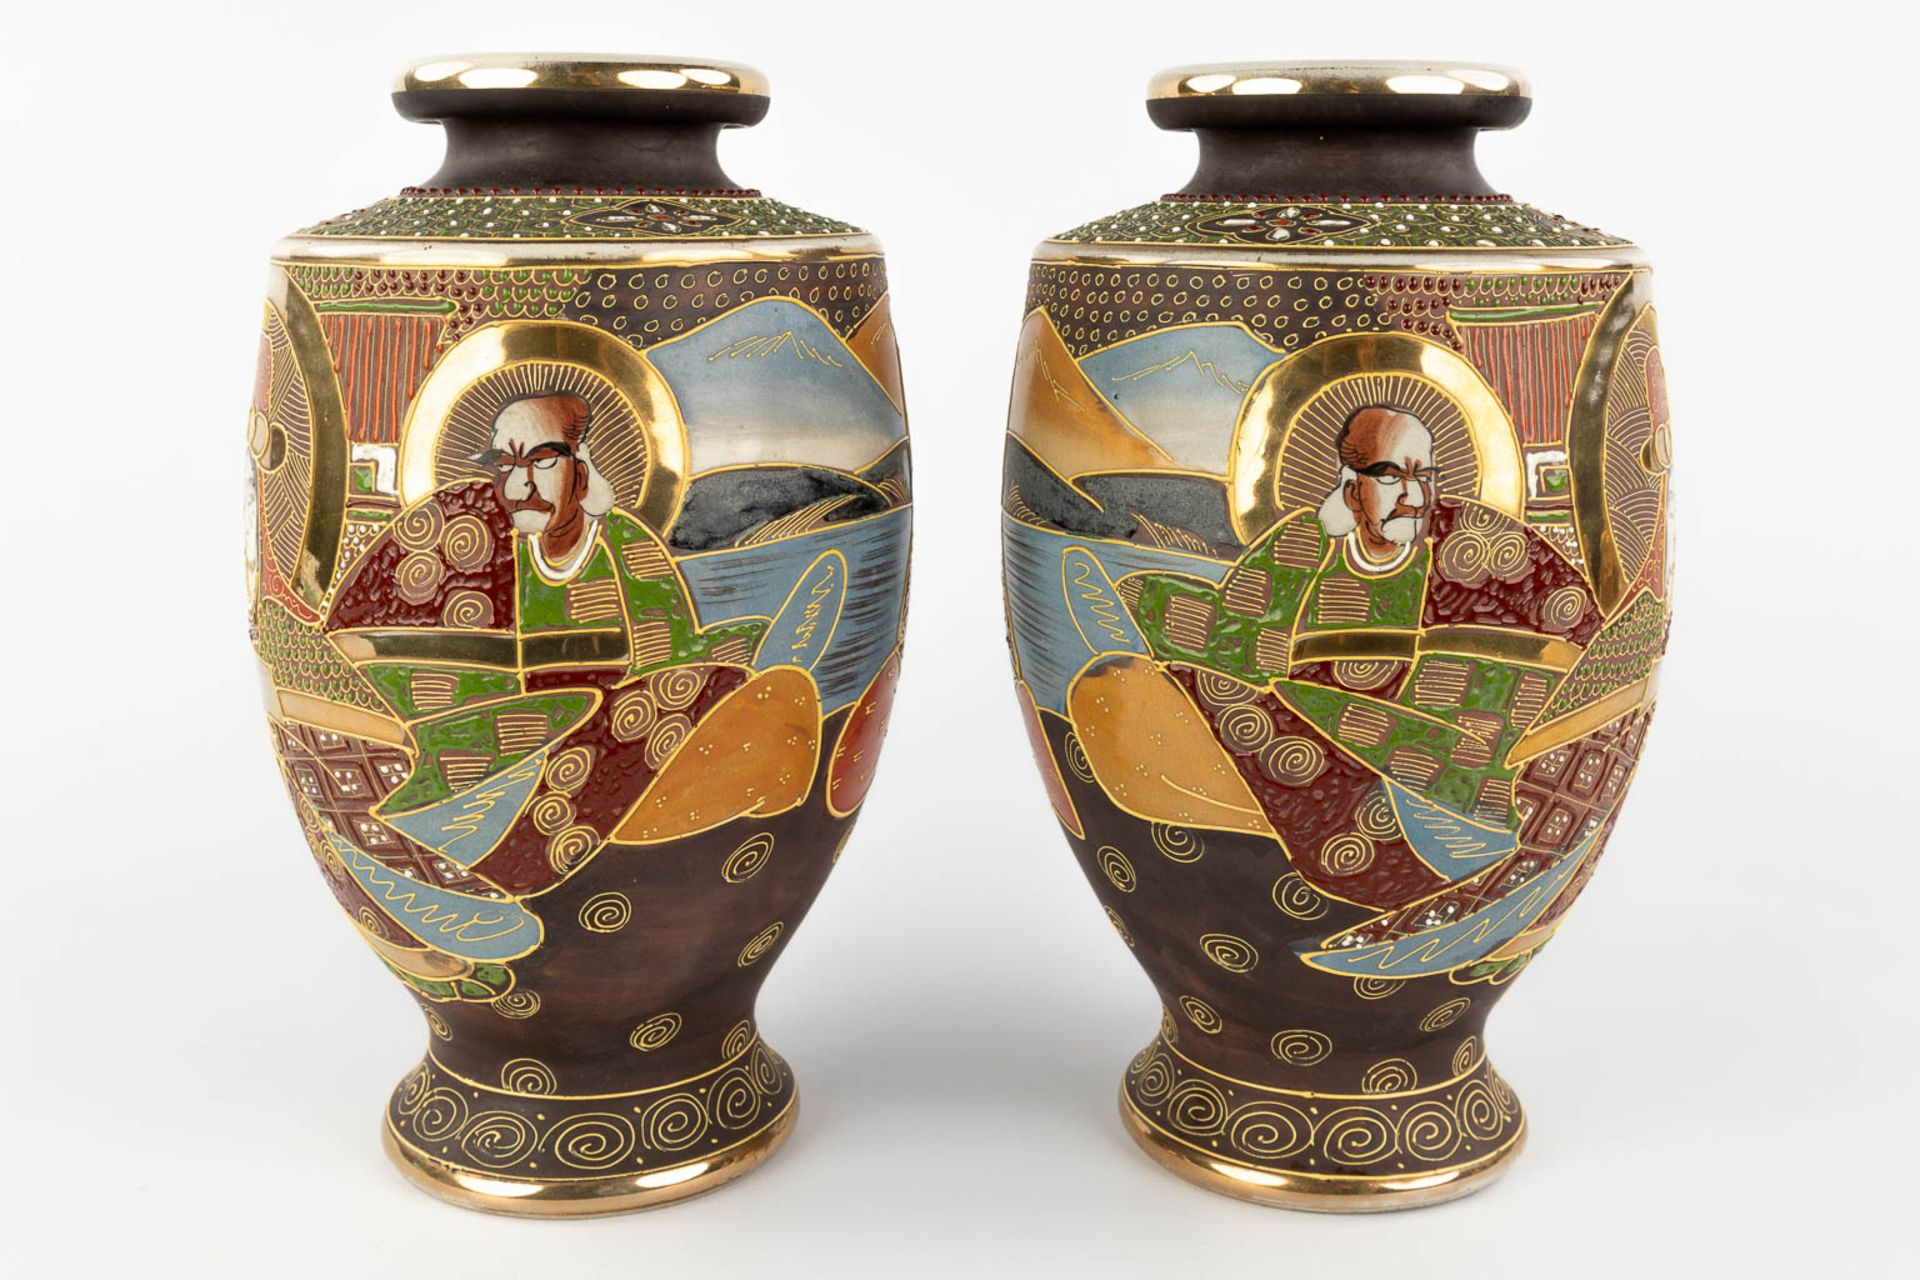 A pair of vases, a vase and jar with lid, Satsuma faience, Japan. 20th C. (H:31 x D:19 cm) - Image 8 of 19